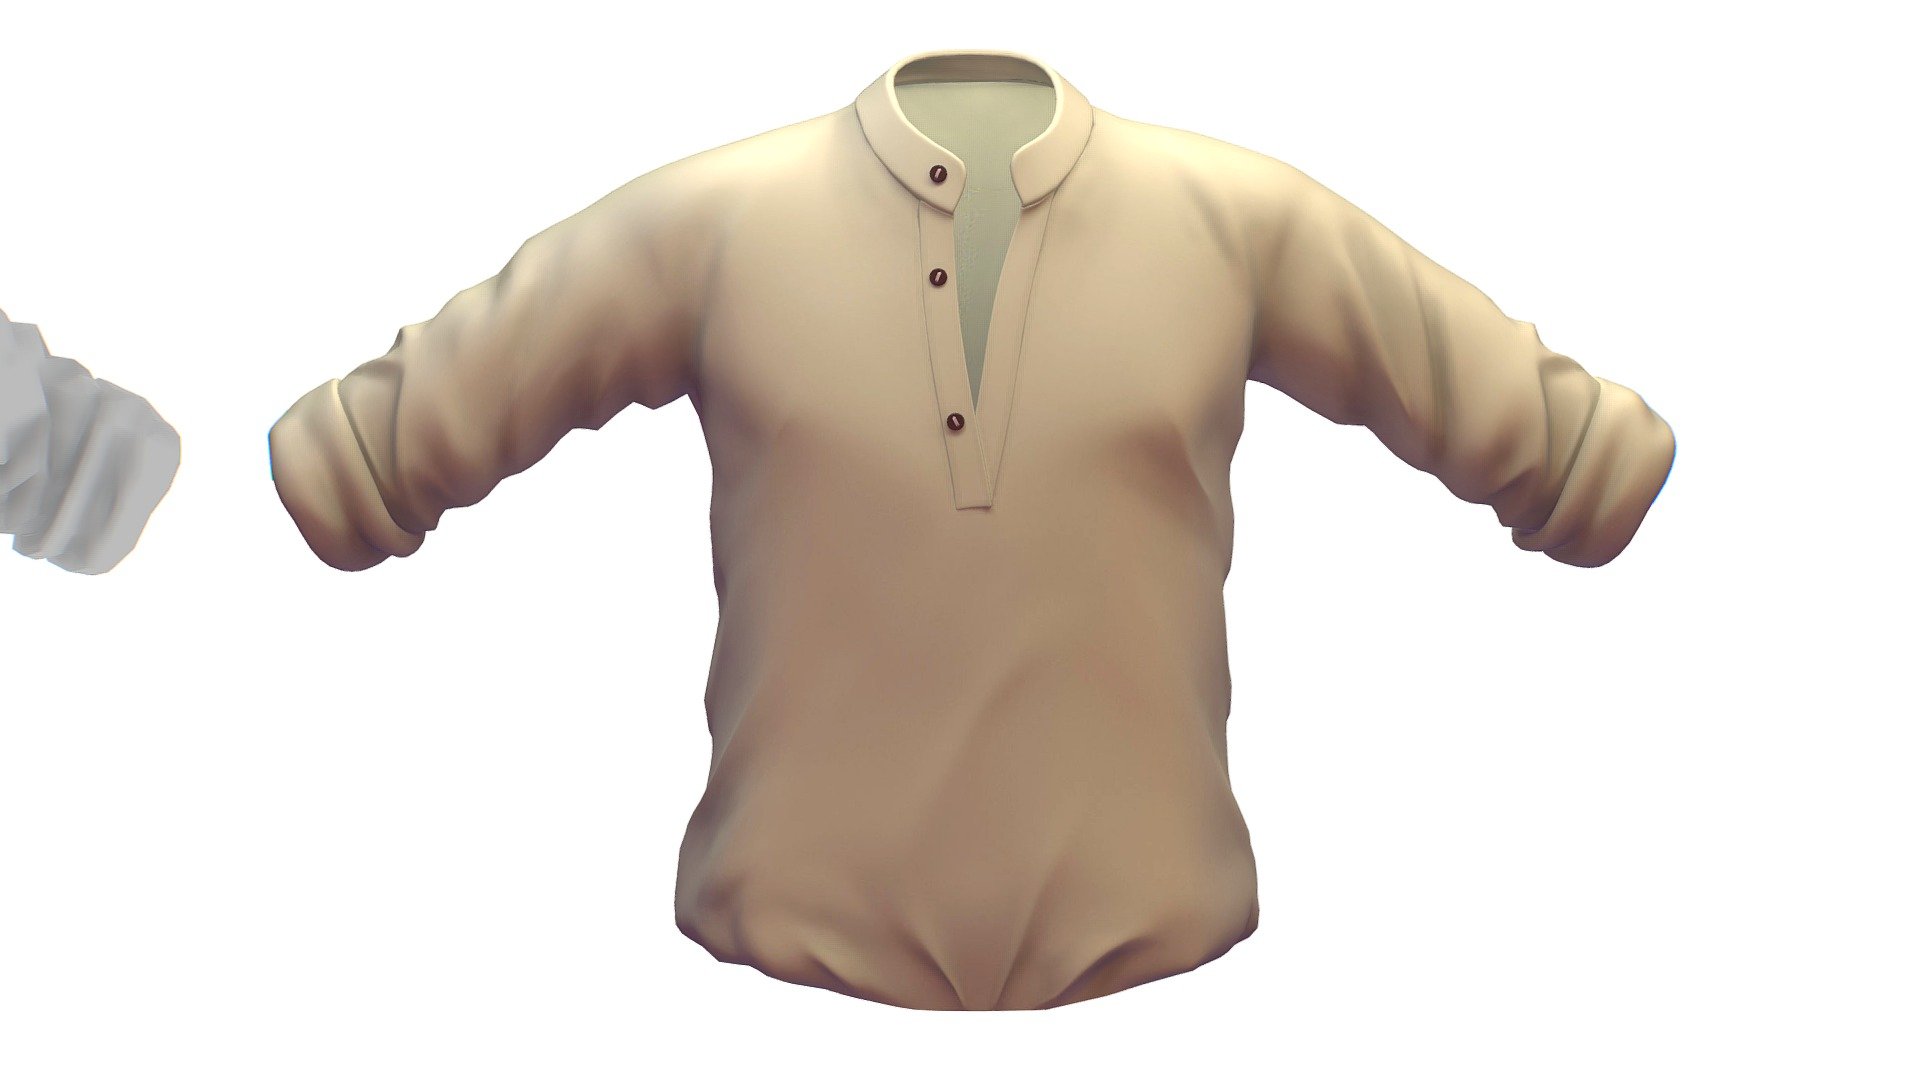 Cartoon High Poly Subdivision Beige Shirt

No HDRI map, No Light, No material settings - only Diffuse/Color Map Texture (2500Х2500) 

More information about the 3D model: please use the Sketchfab Model Inspector - Key (i) - Cartoon High Poly Subdivision Beige Shirt - Buy Royalty Free 3D model by Oleg Shuldiakov (@olegshuldiakov) 3d model